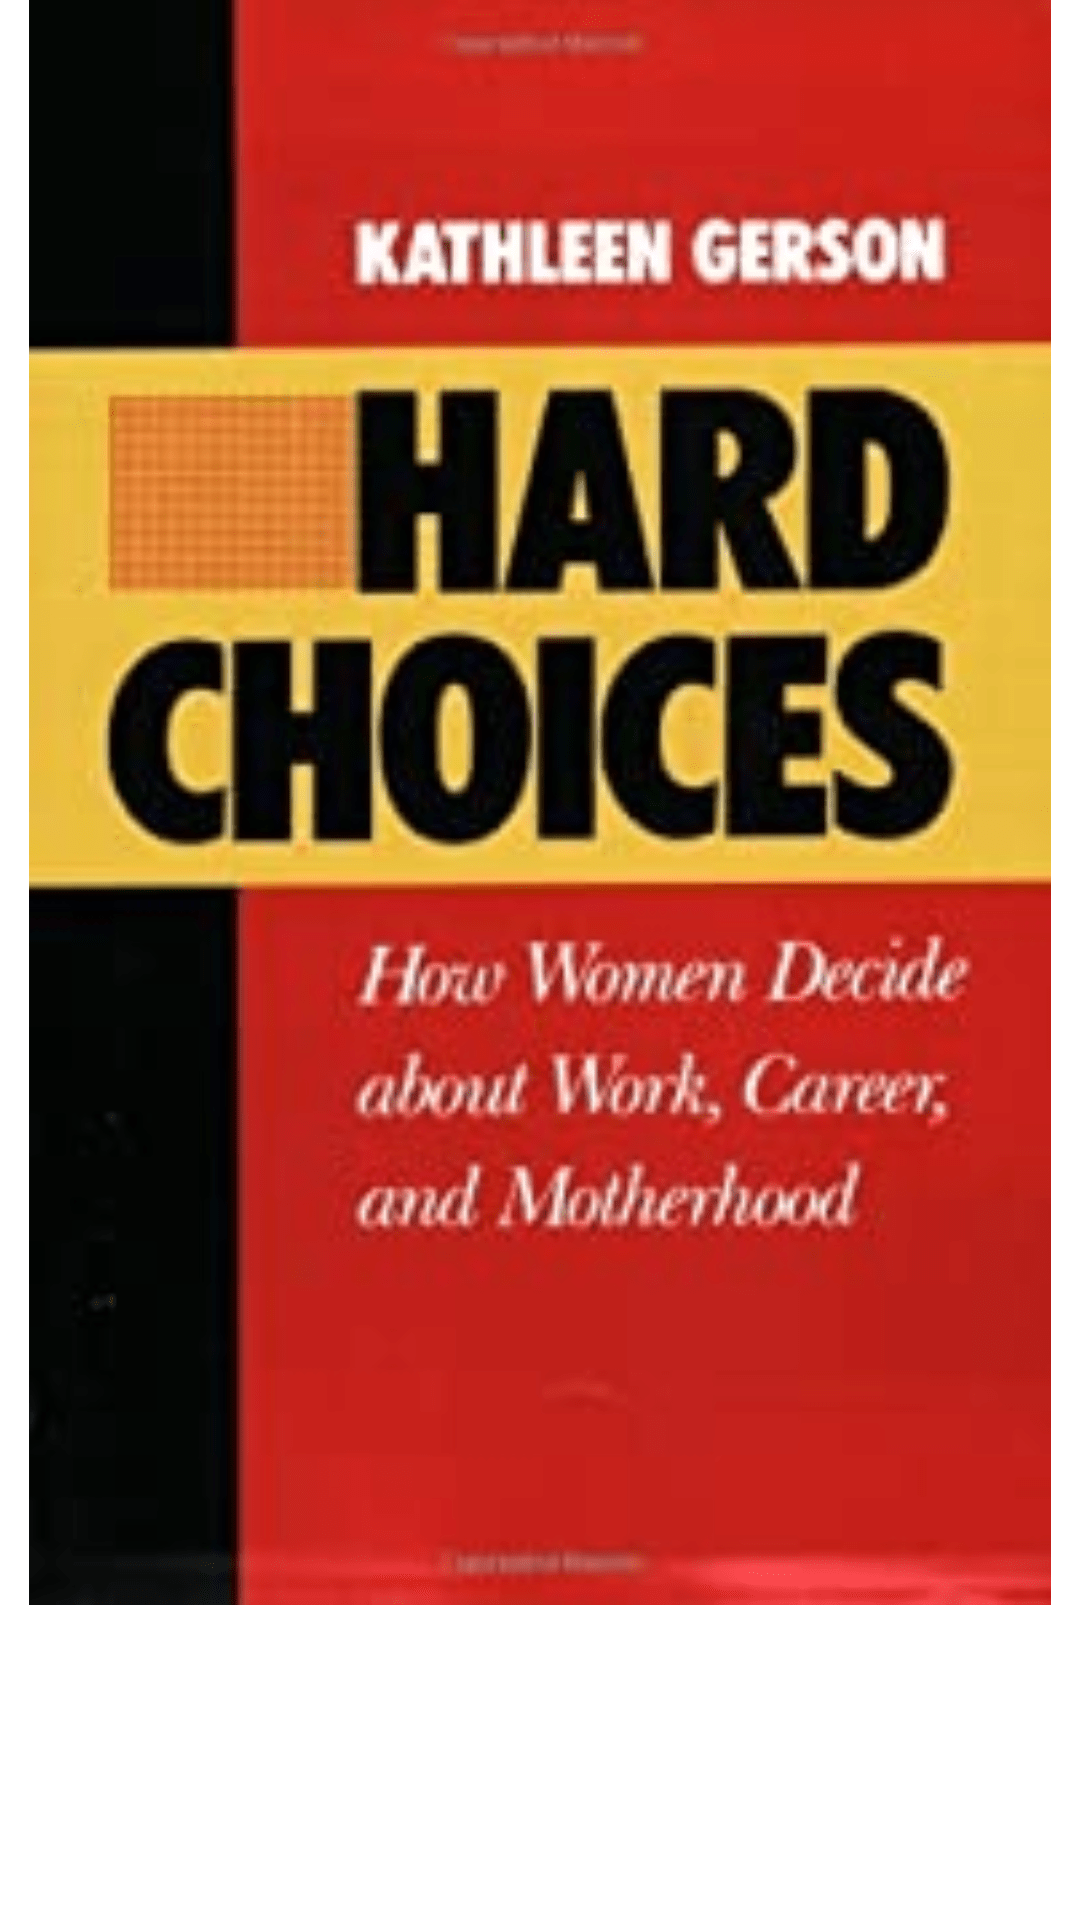 Hard Choices: How Women Decide About Work, Career and Motherhood